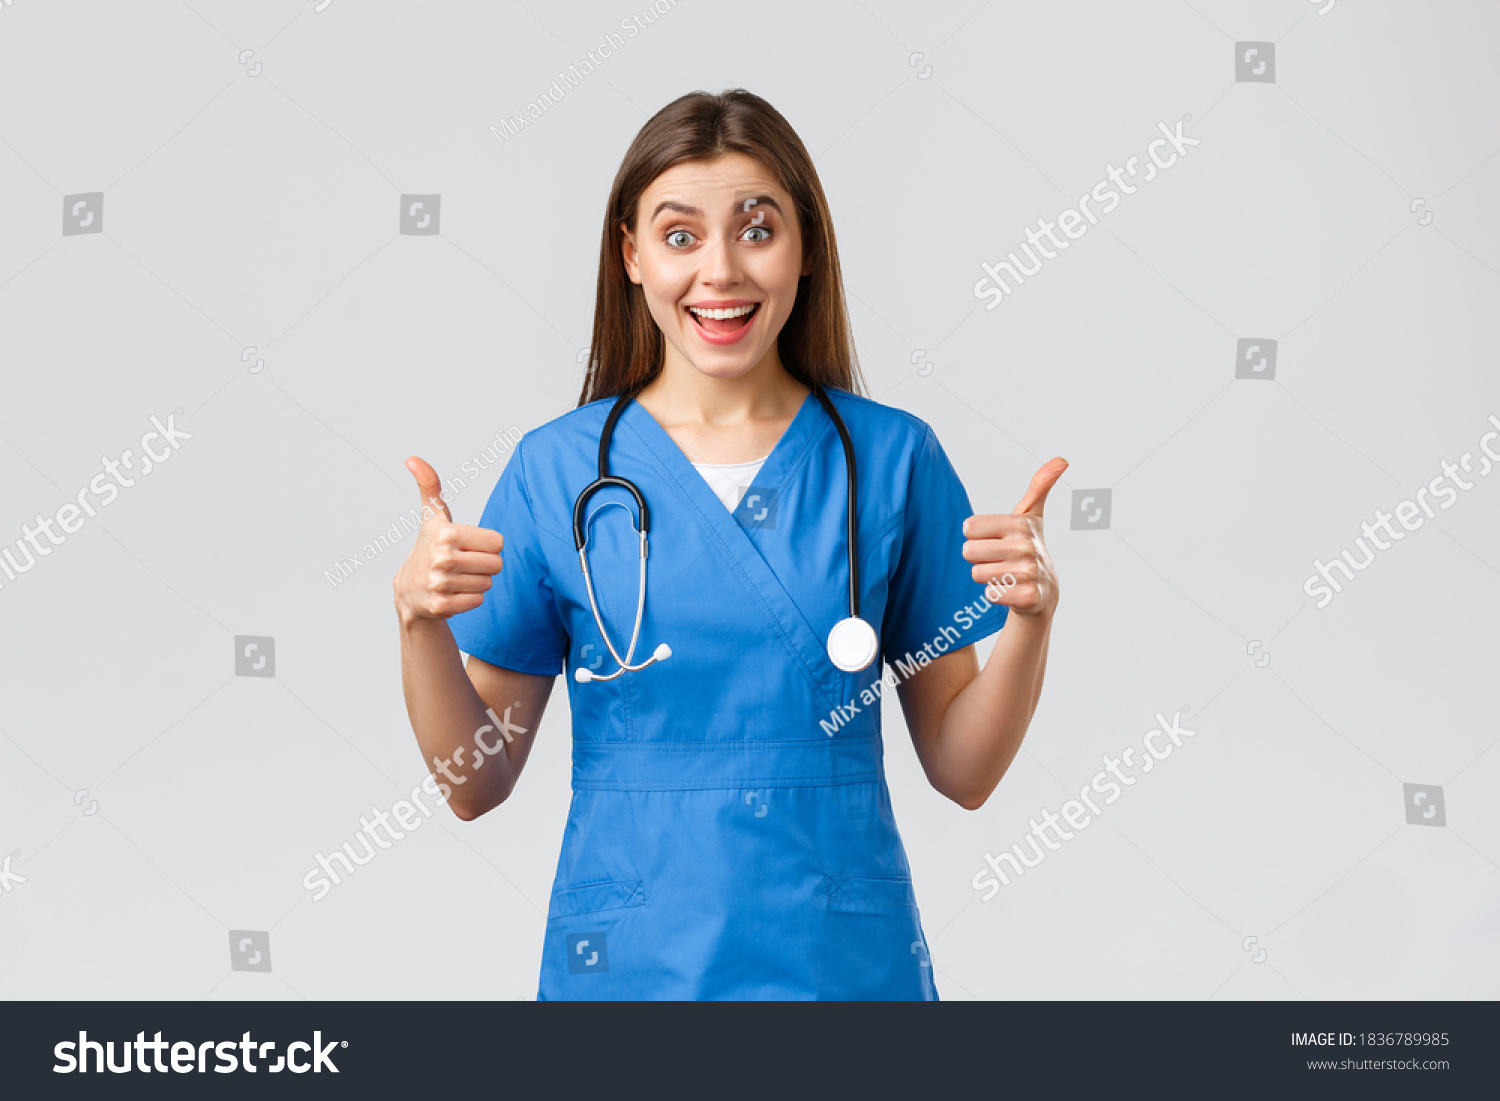 Medical workers, healthcare, covid-19 and vaccination concept. Enthusiastic and upbeat female nurse, doctor in blue scrubs, think wonderful idea, show thumbs-up in approval #1836789985